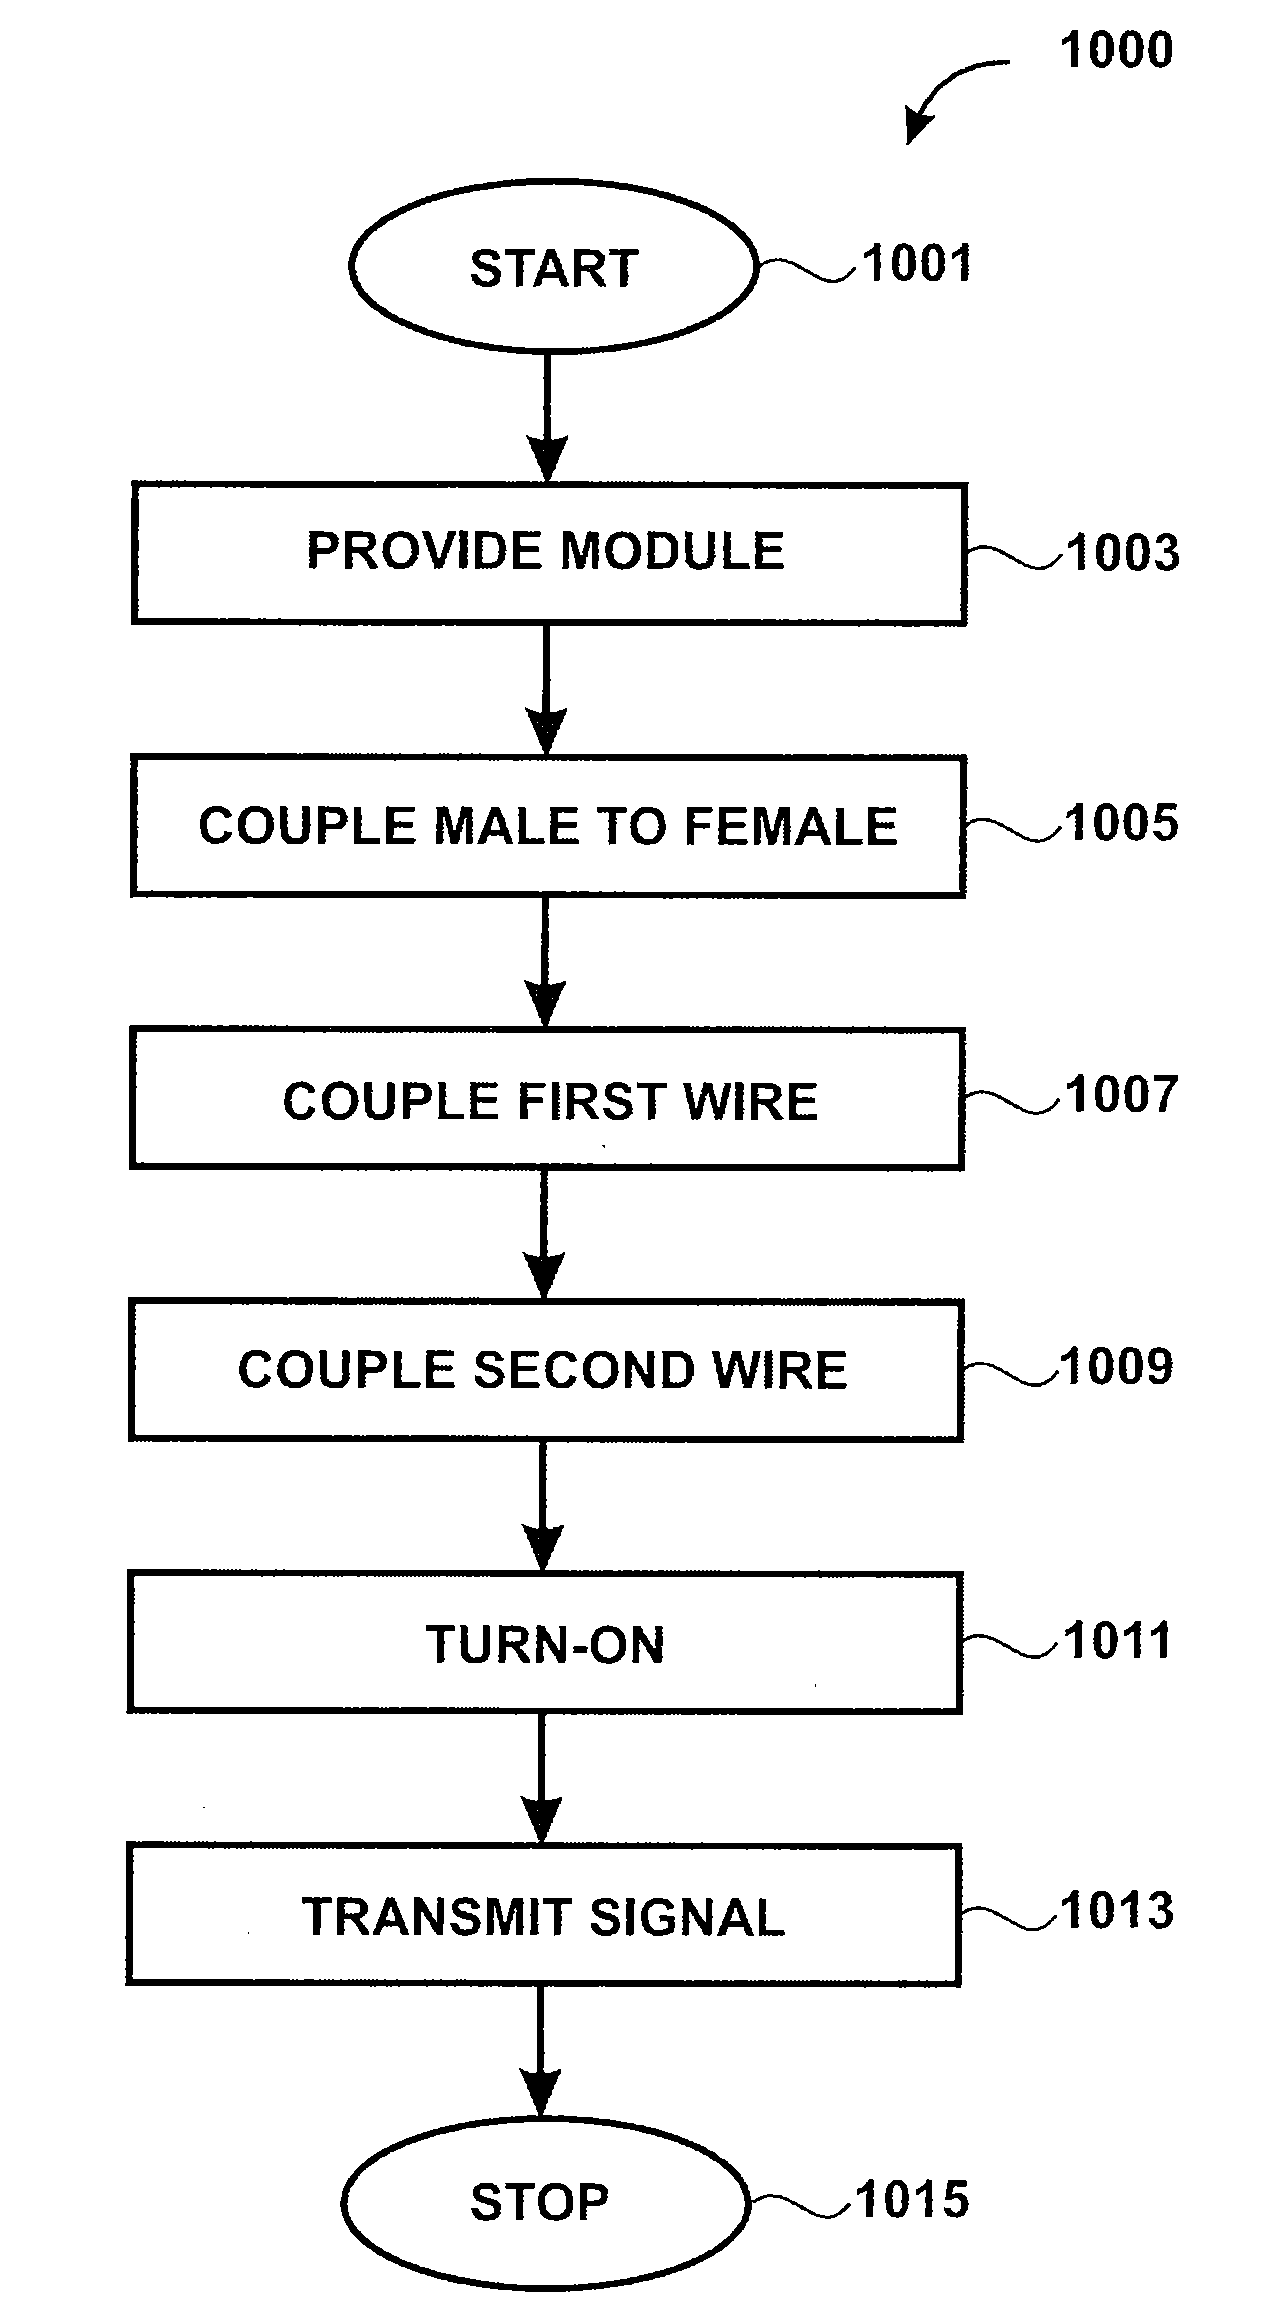 Non-intrusive method and system for coupling powerline communications signals to a powerline network